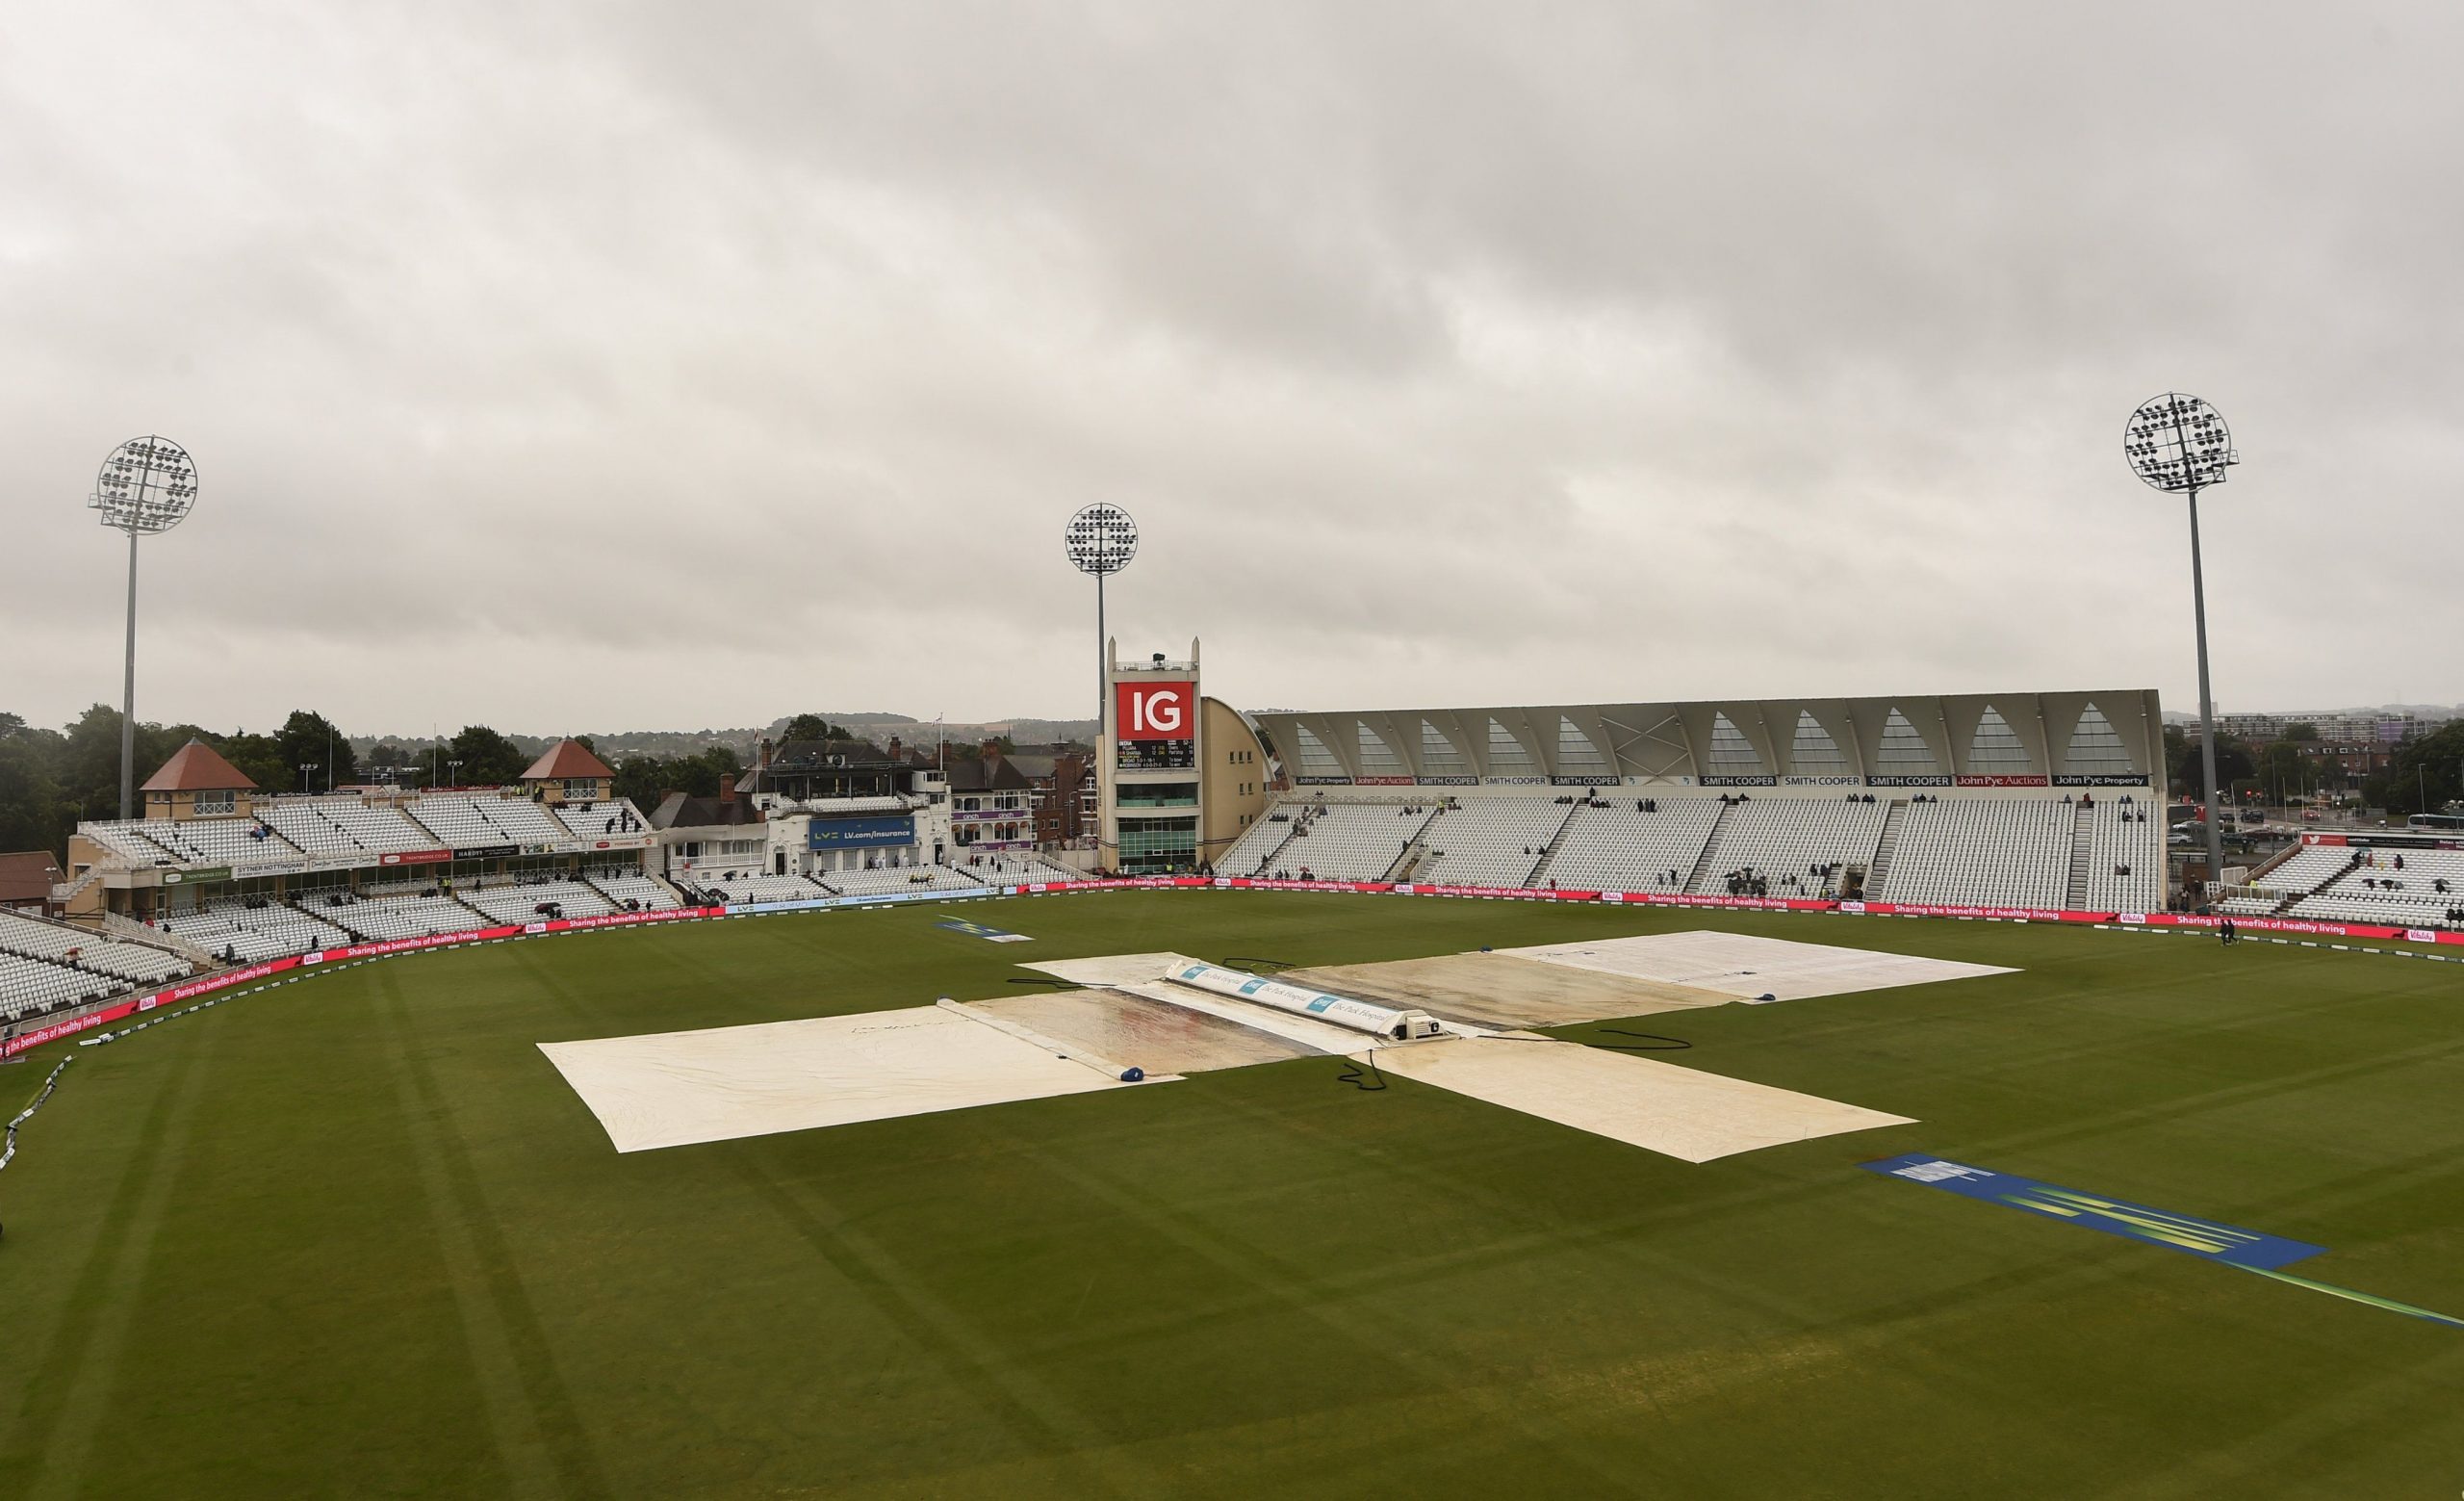 ENG vs IND 2021: How Will Be The Weather Conditions At Lord’s On Day 1